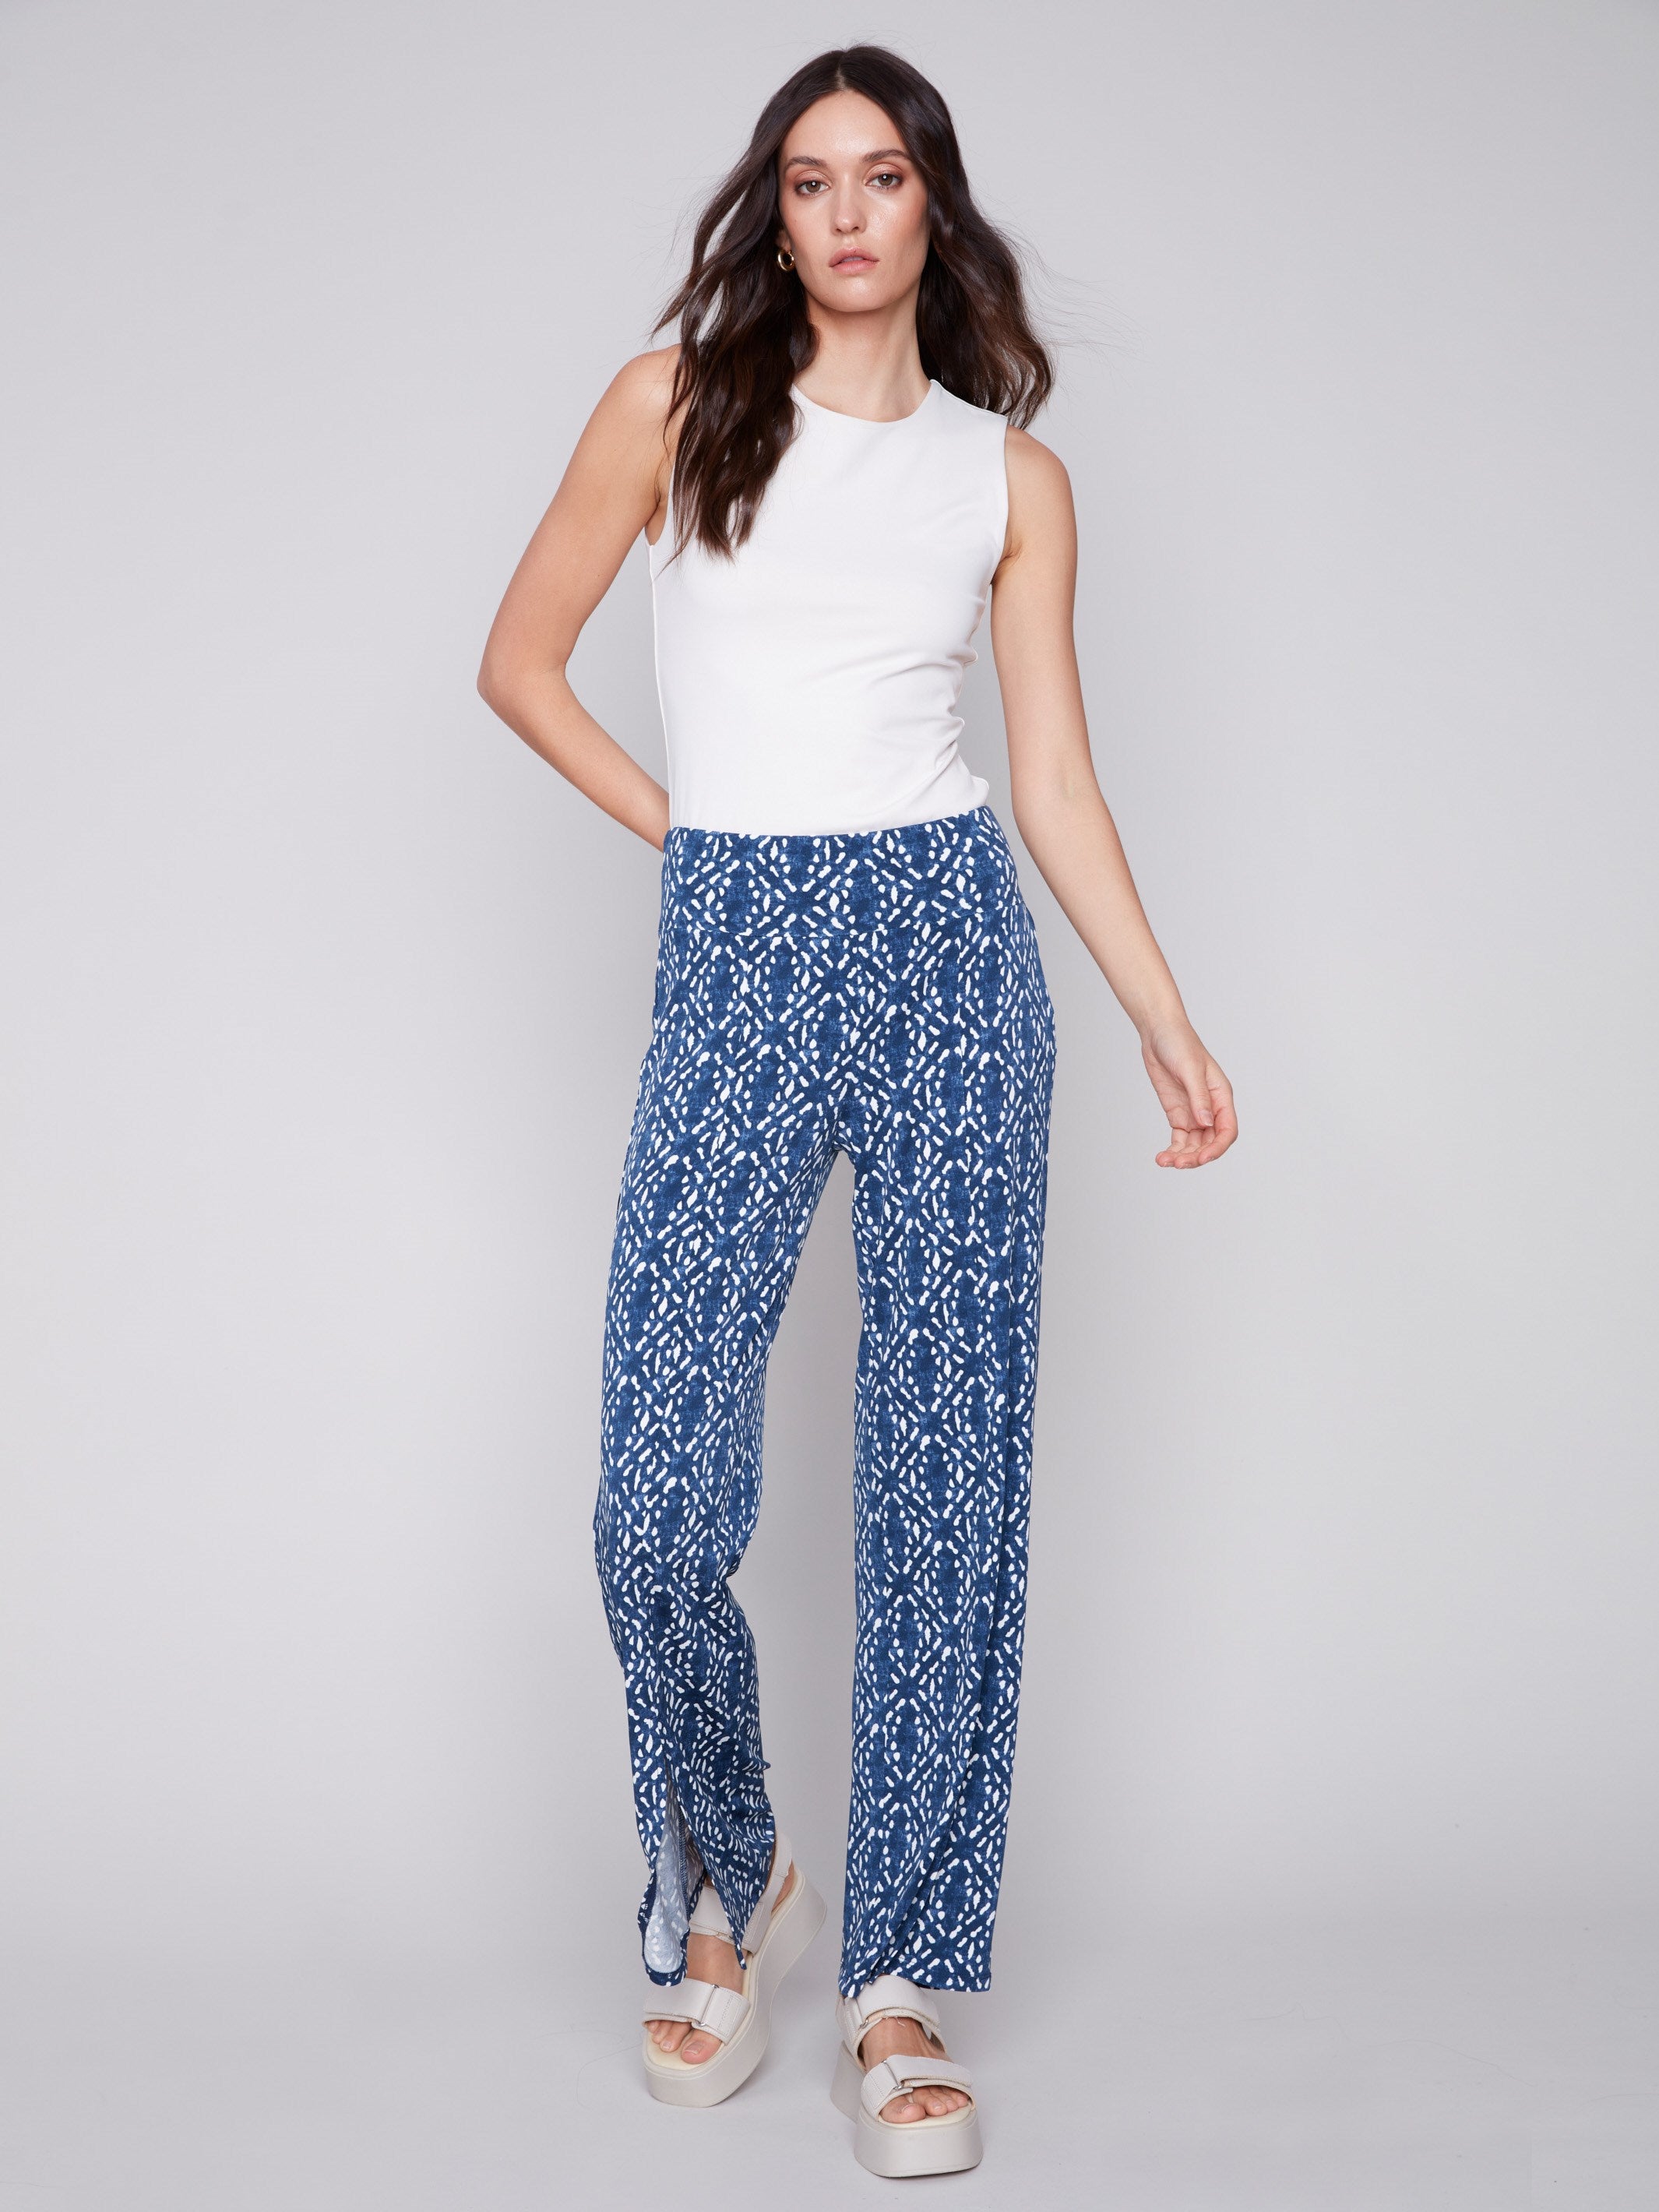 Printed Wide Leg Pants with Front Slits - Indigo - Charlie B Collection Canada - Image 4